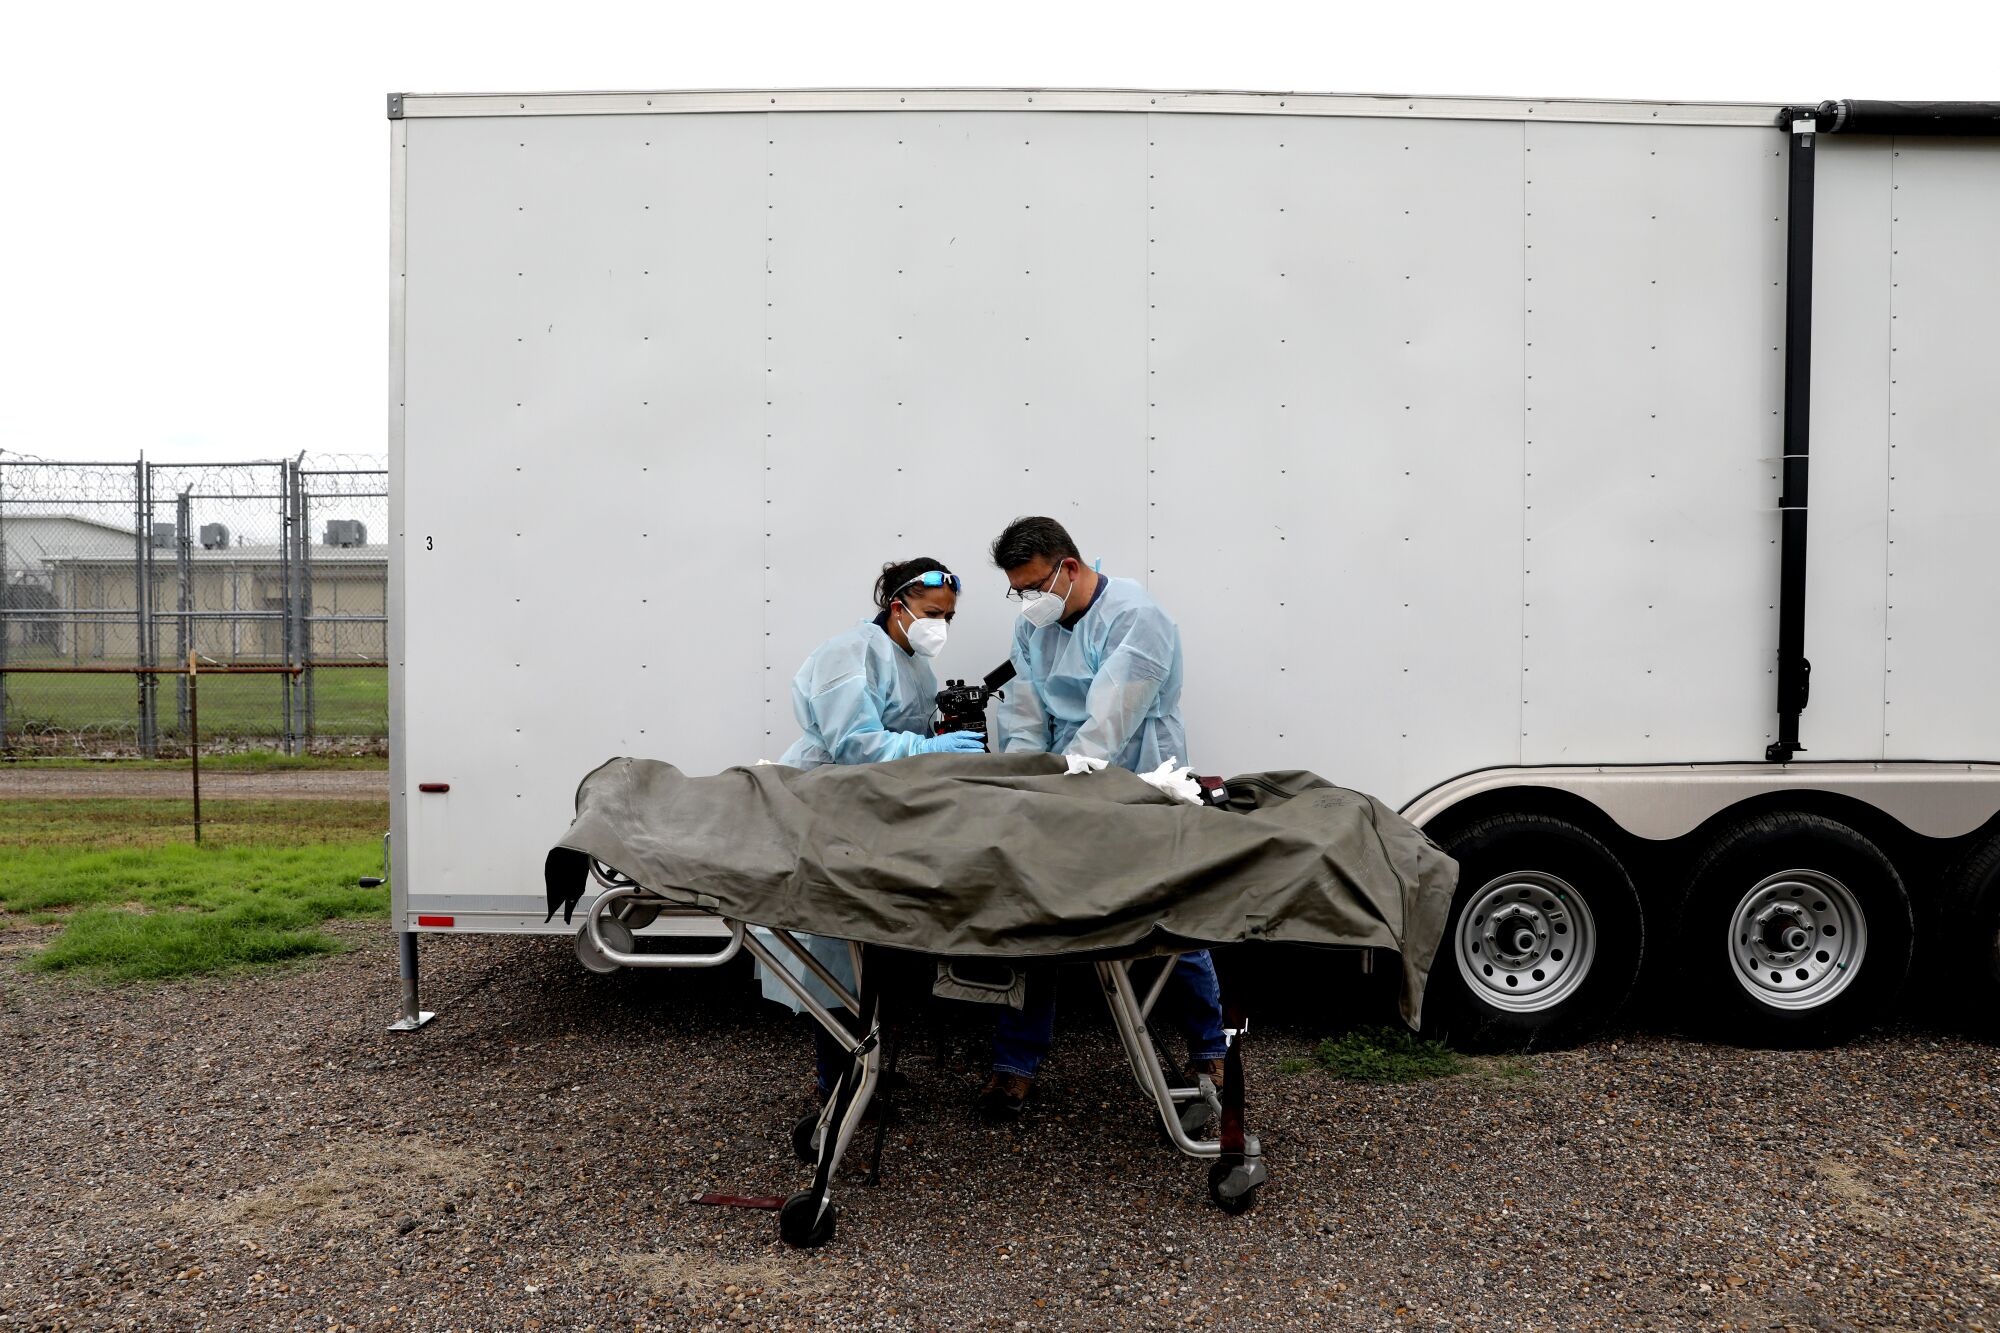 Two forensics workers stand over a body on a gurney beside a trailer